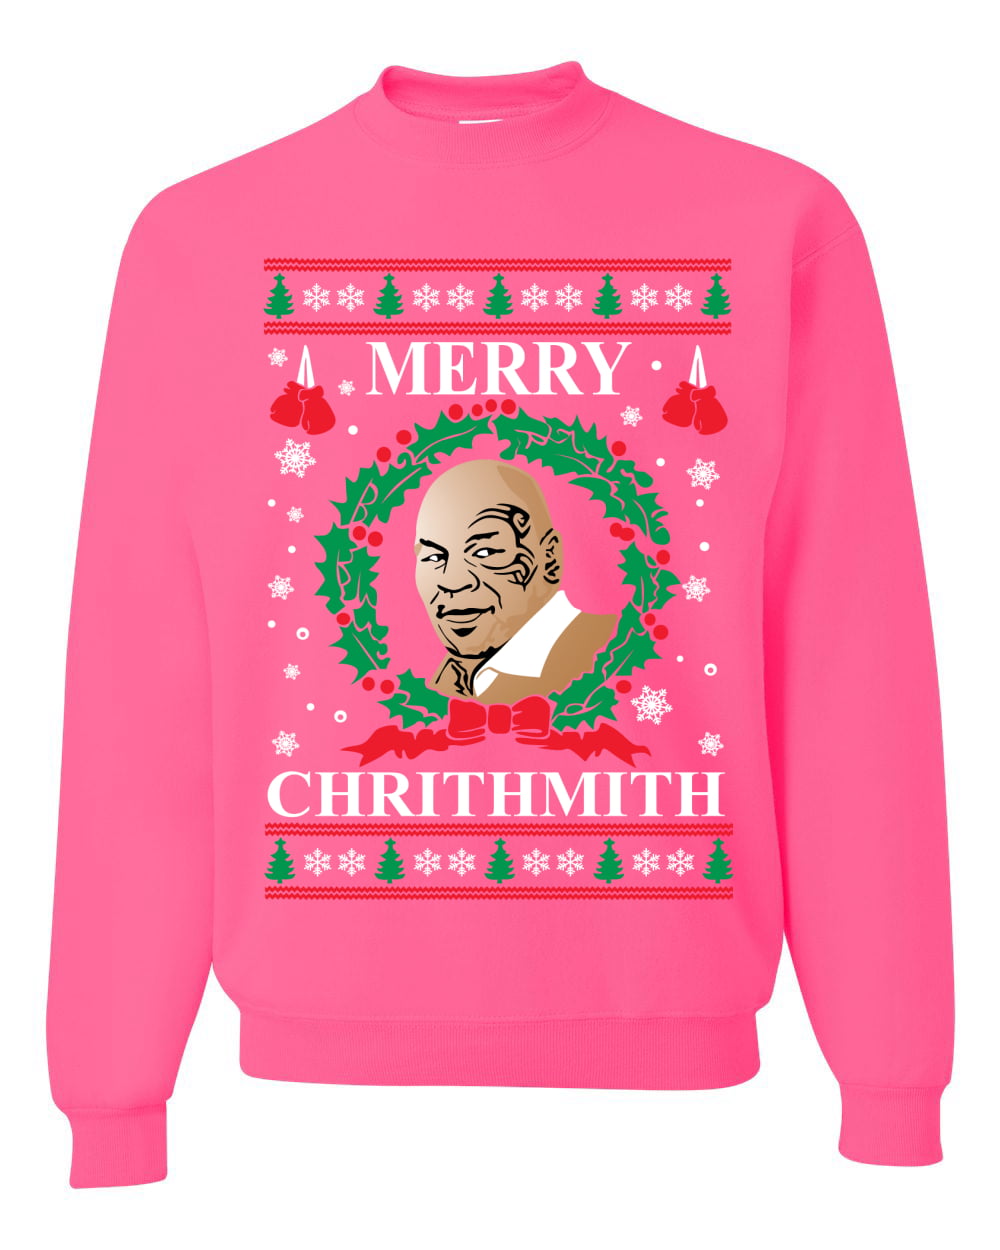 Merry Chrithmith Ugly Christmas Jumper Crew Neck.